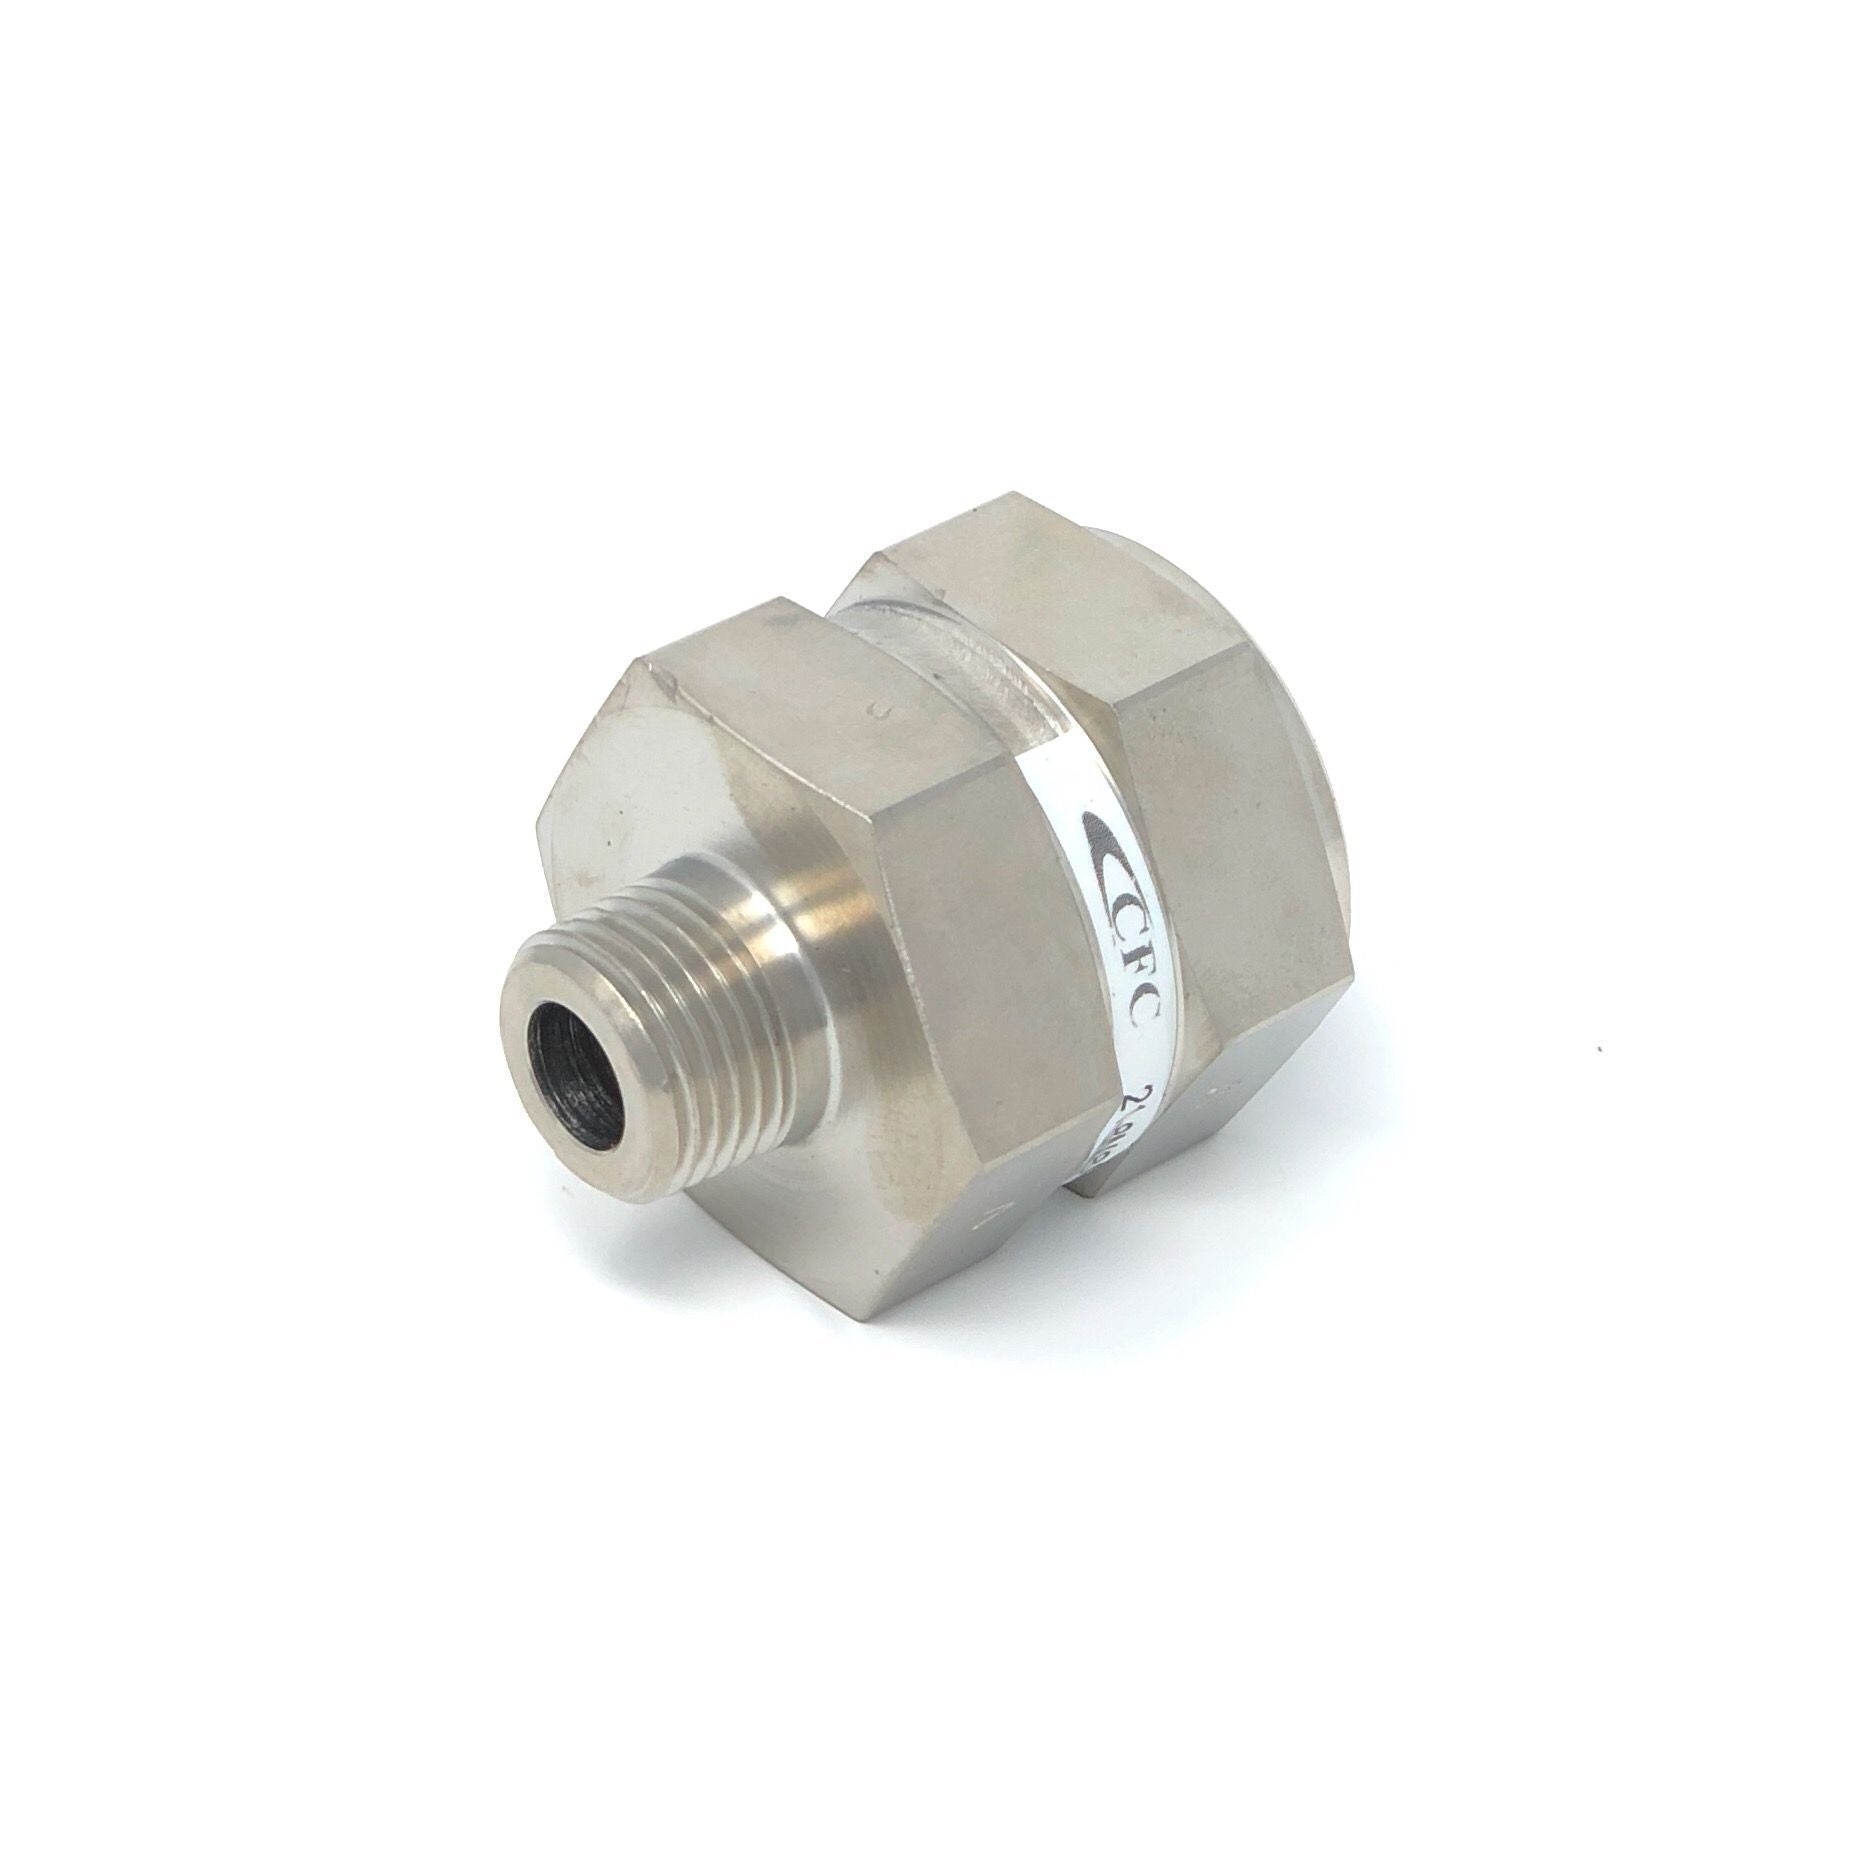 21-6T6T-100S : Chase High Pressure Inline Filter, 6000psi, 3/8" 37 Degree Flare , 100 Micron, No Visual Indicator, No Bypass